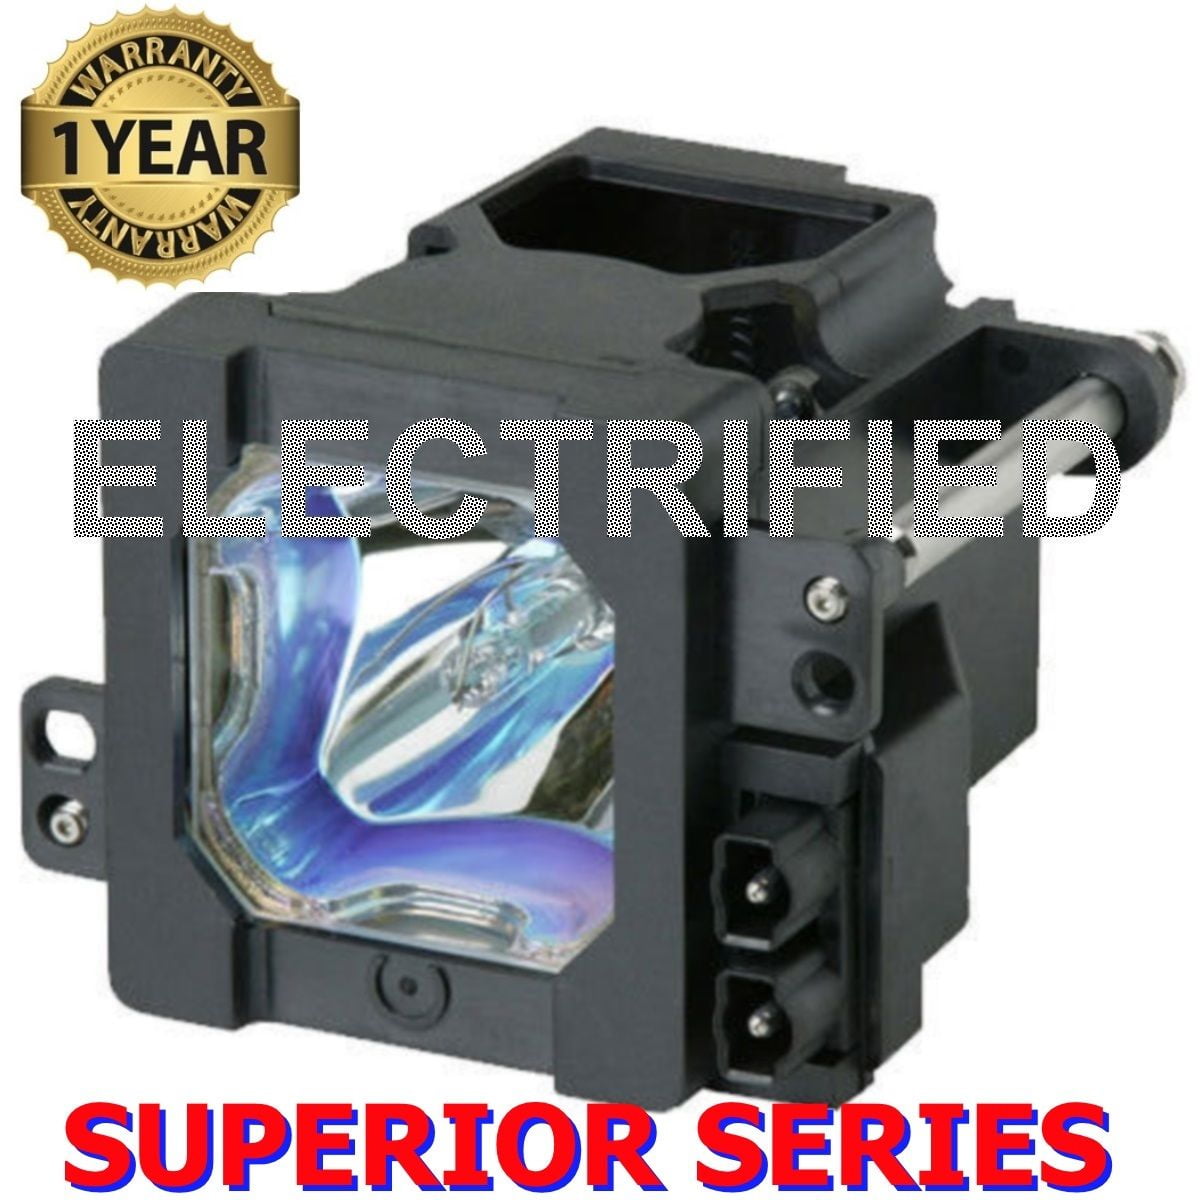 JVC TS-CL110UAA TSCL110UAA SUPERIOR SERIES LAMP-NEW & IMPROVED FOR HD-61FH96